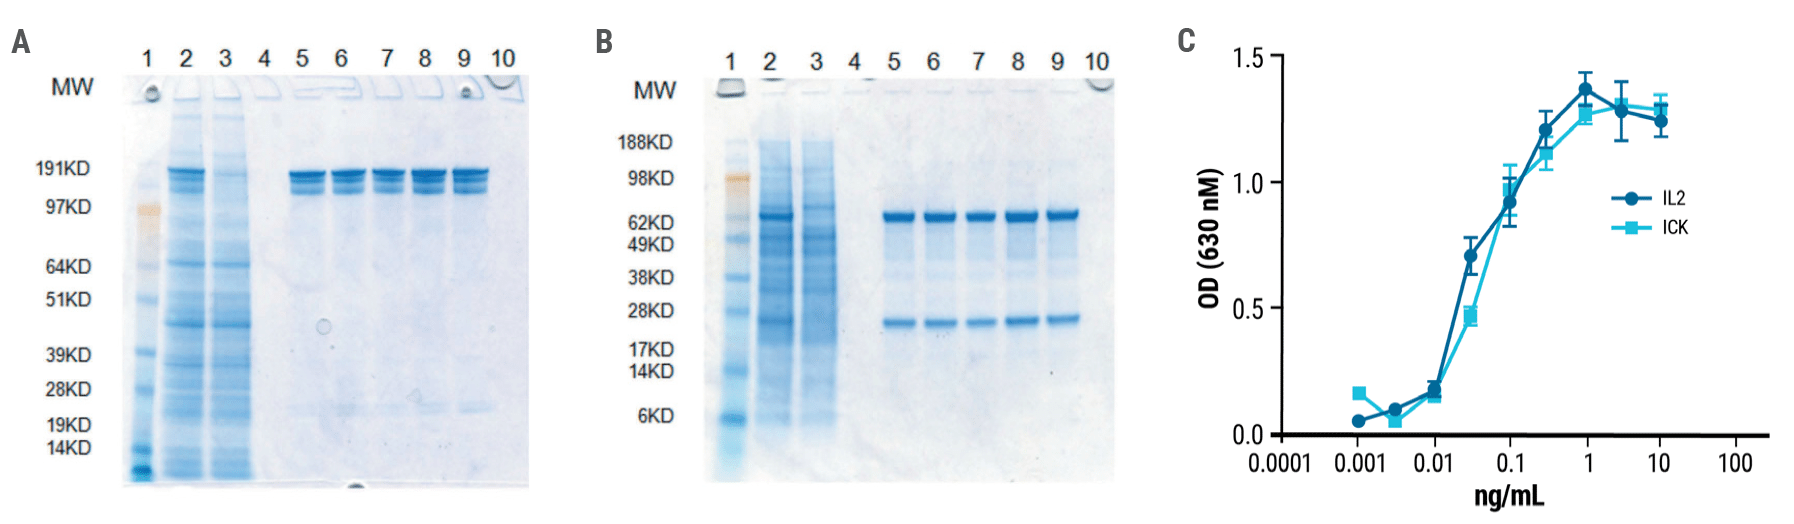 Anti-CEA-IL2 ICK is a fully functional fusion protein. Gel electrophoresis of purified ICK was performed under A) non-reducing and B) reducing conditions. Single bands were obtained for both heavy and light chains under reducing conditions. C) ICK activity was measured using a HEK-BlueTM IL-2 reporter cell line. The activity of the anti-CEA-IL-2 ICK was comparable to that of recombinant human IL-2.